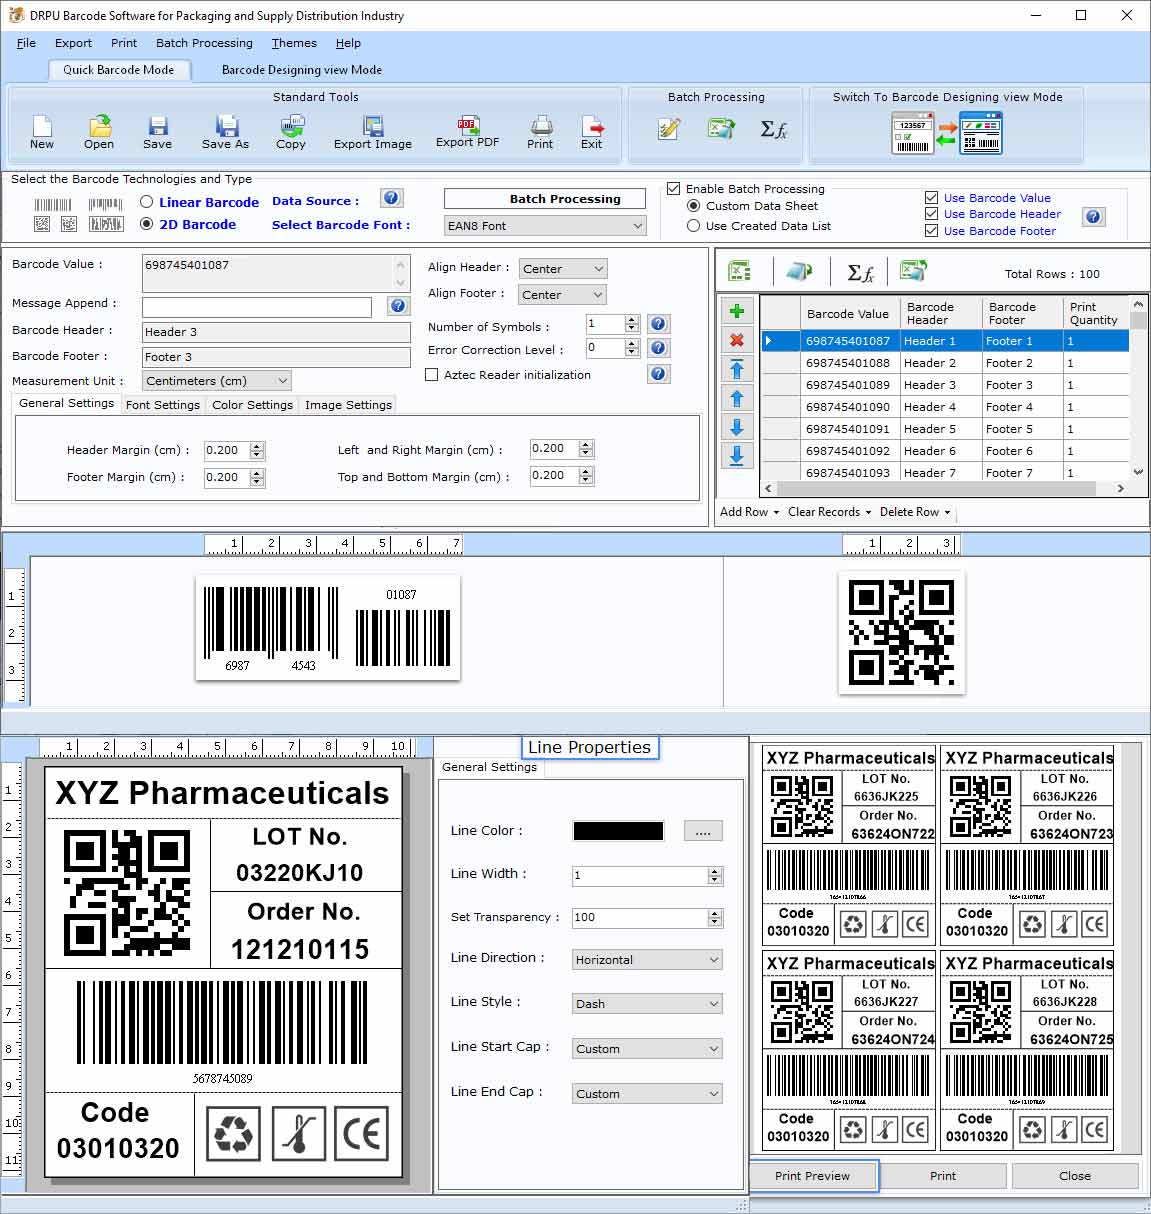 Screenshot of Barcode for Distribution Industry 7.3.0.1